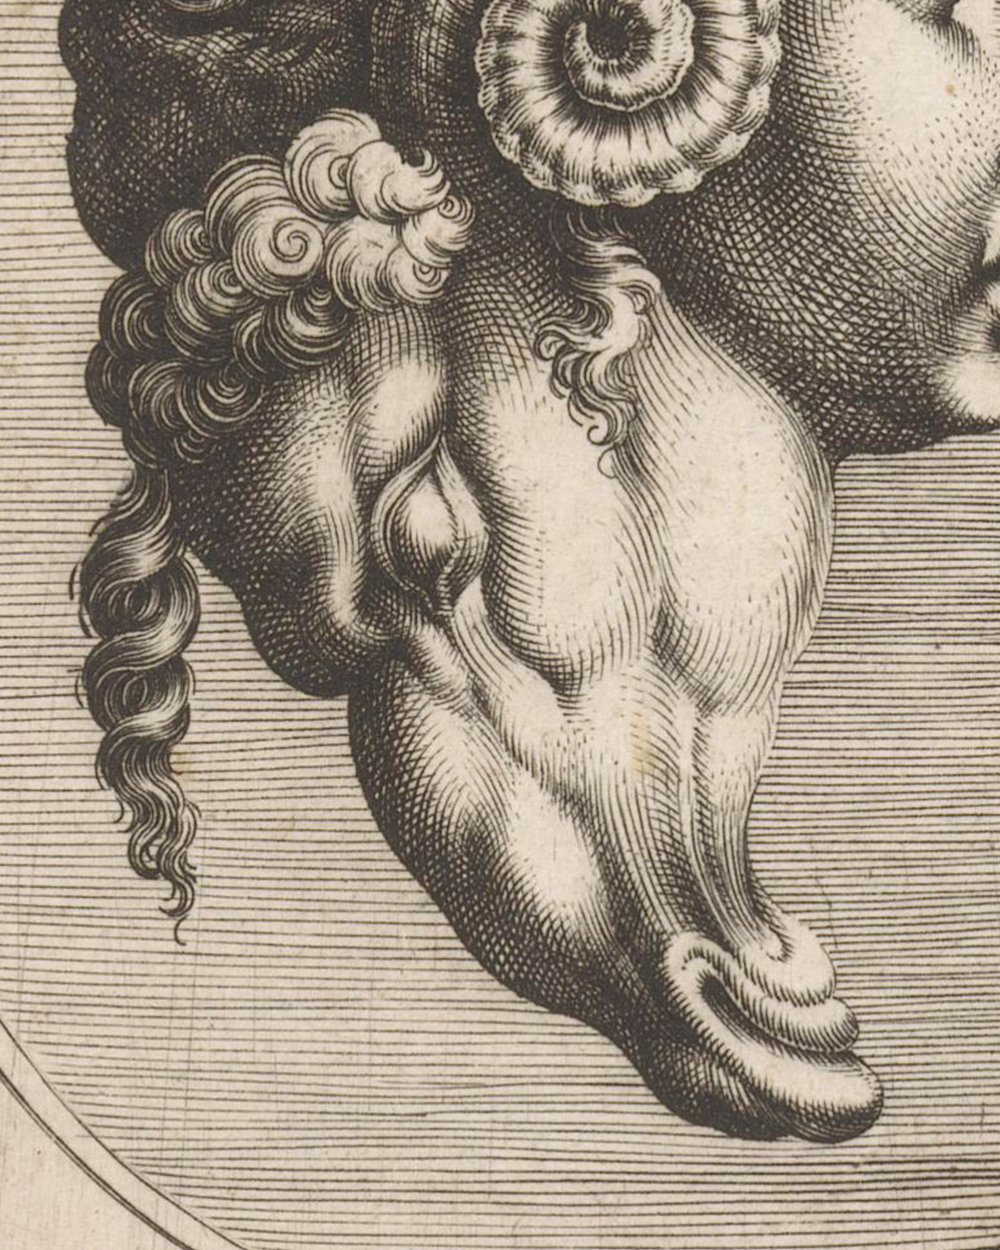 ''Three faces and the head of a ram'' (1590 - 1660)